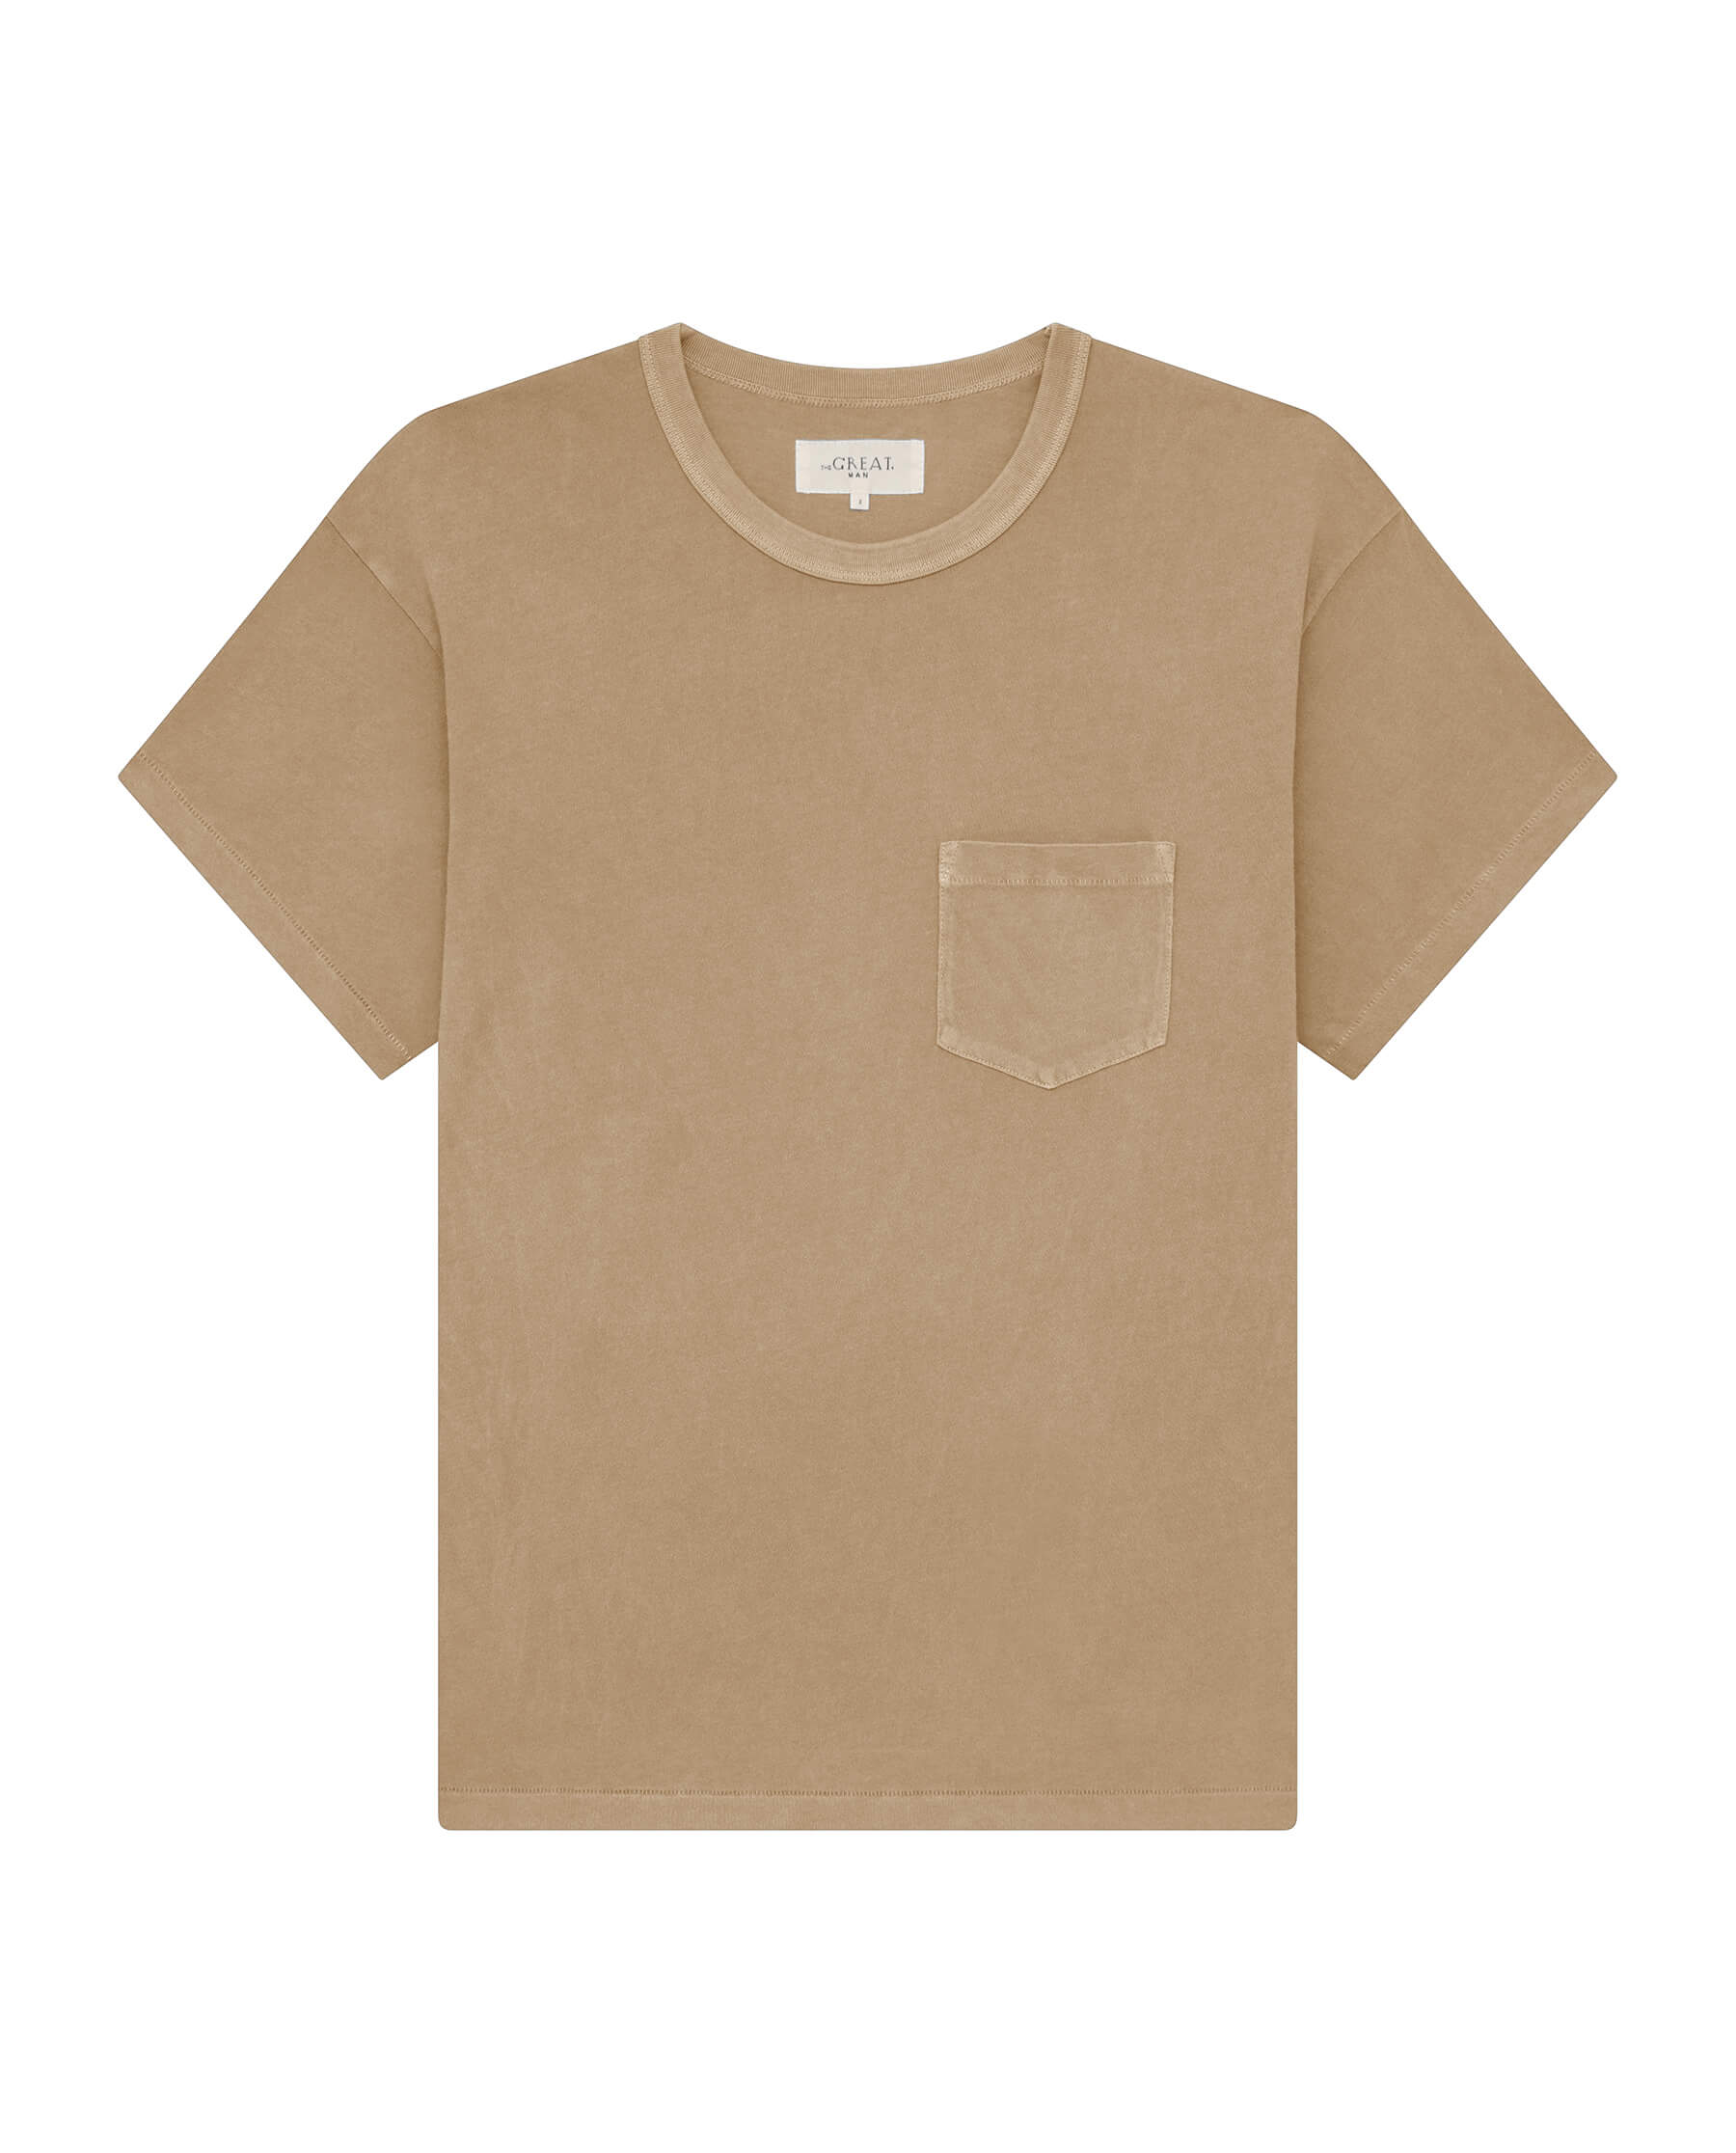 The Men's Pocket Tee. -- Fawn